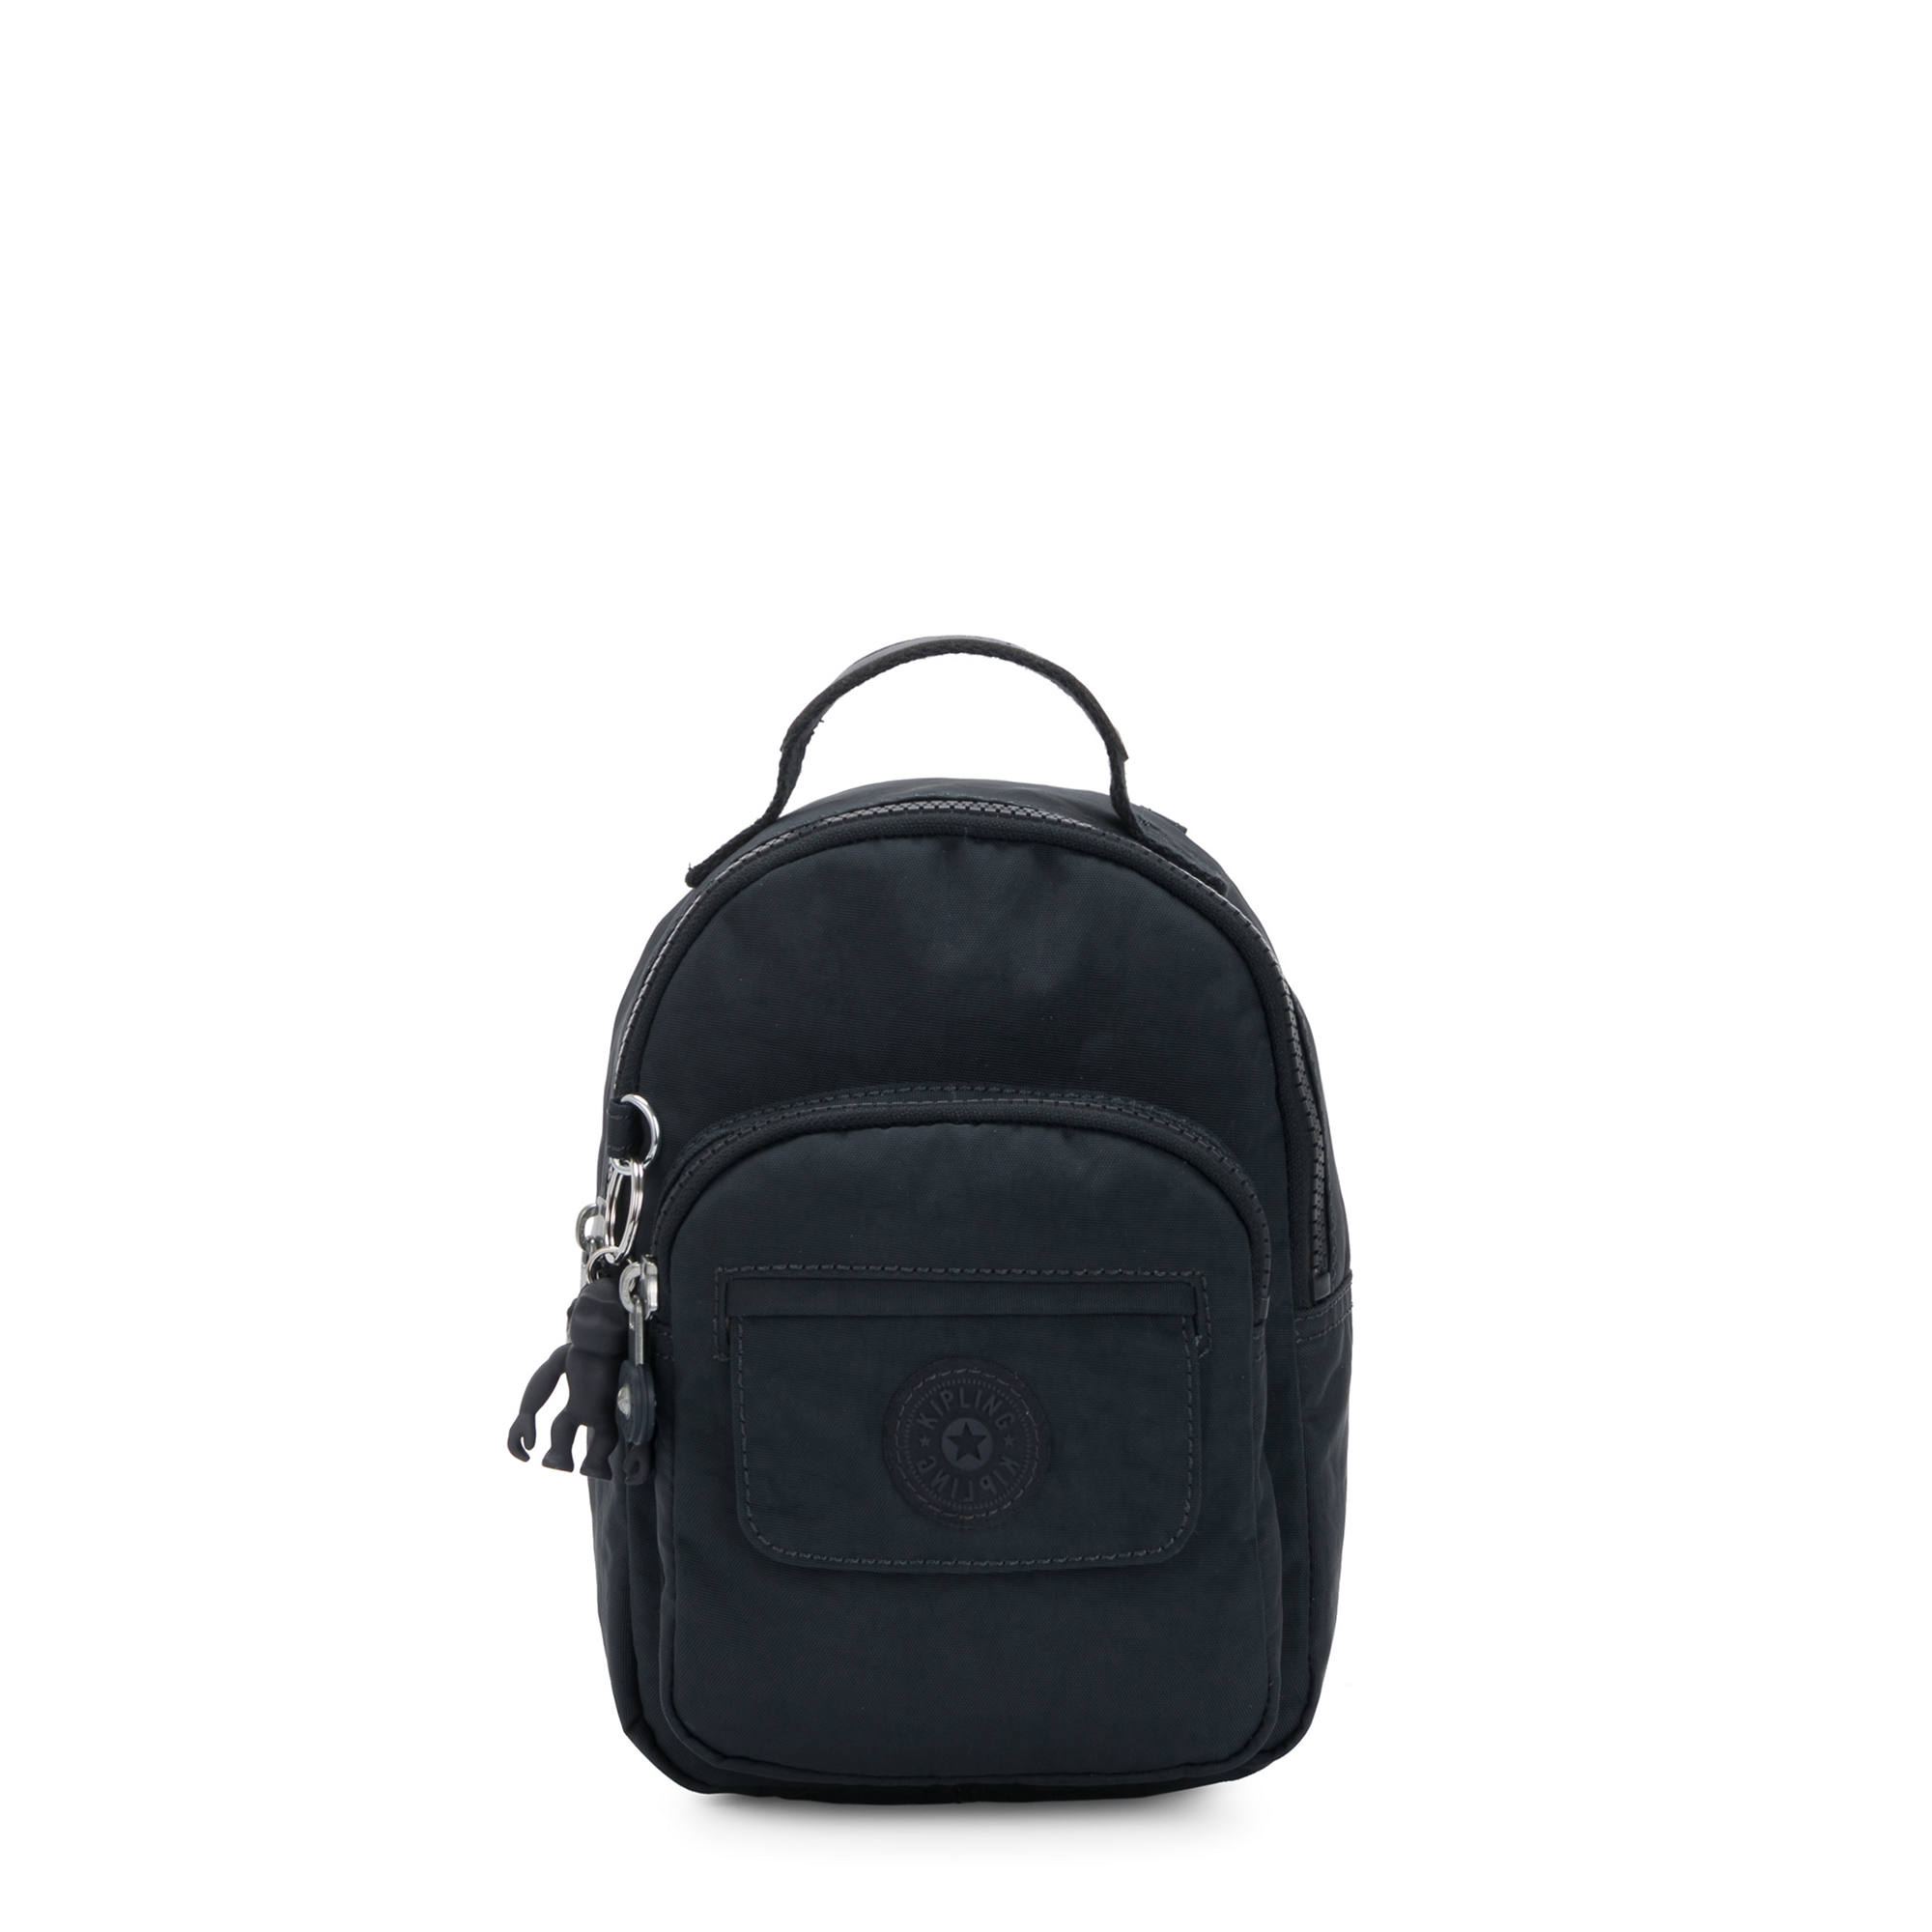 Backpack Purses: A Guide to Convertible Bags | Kipling US